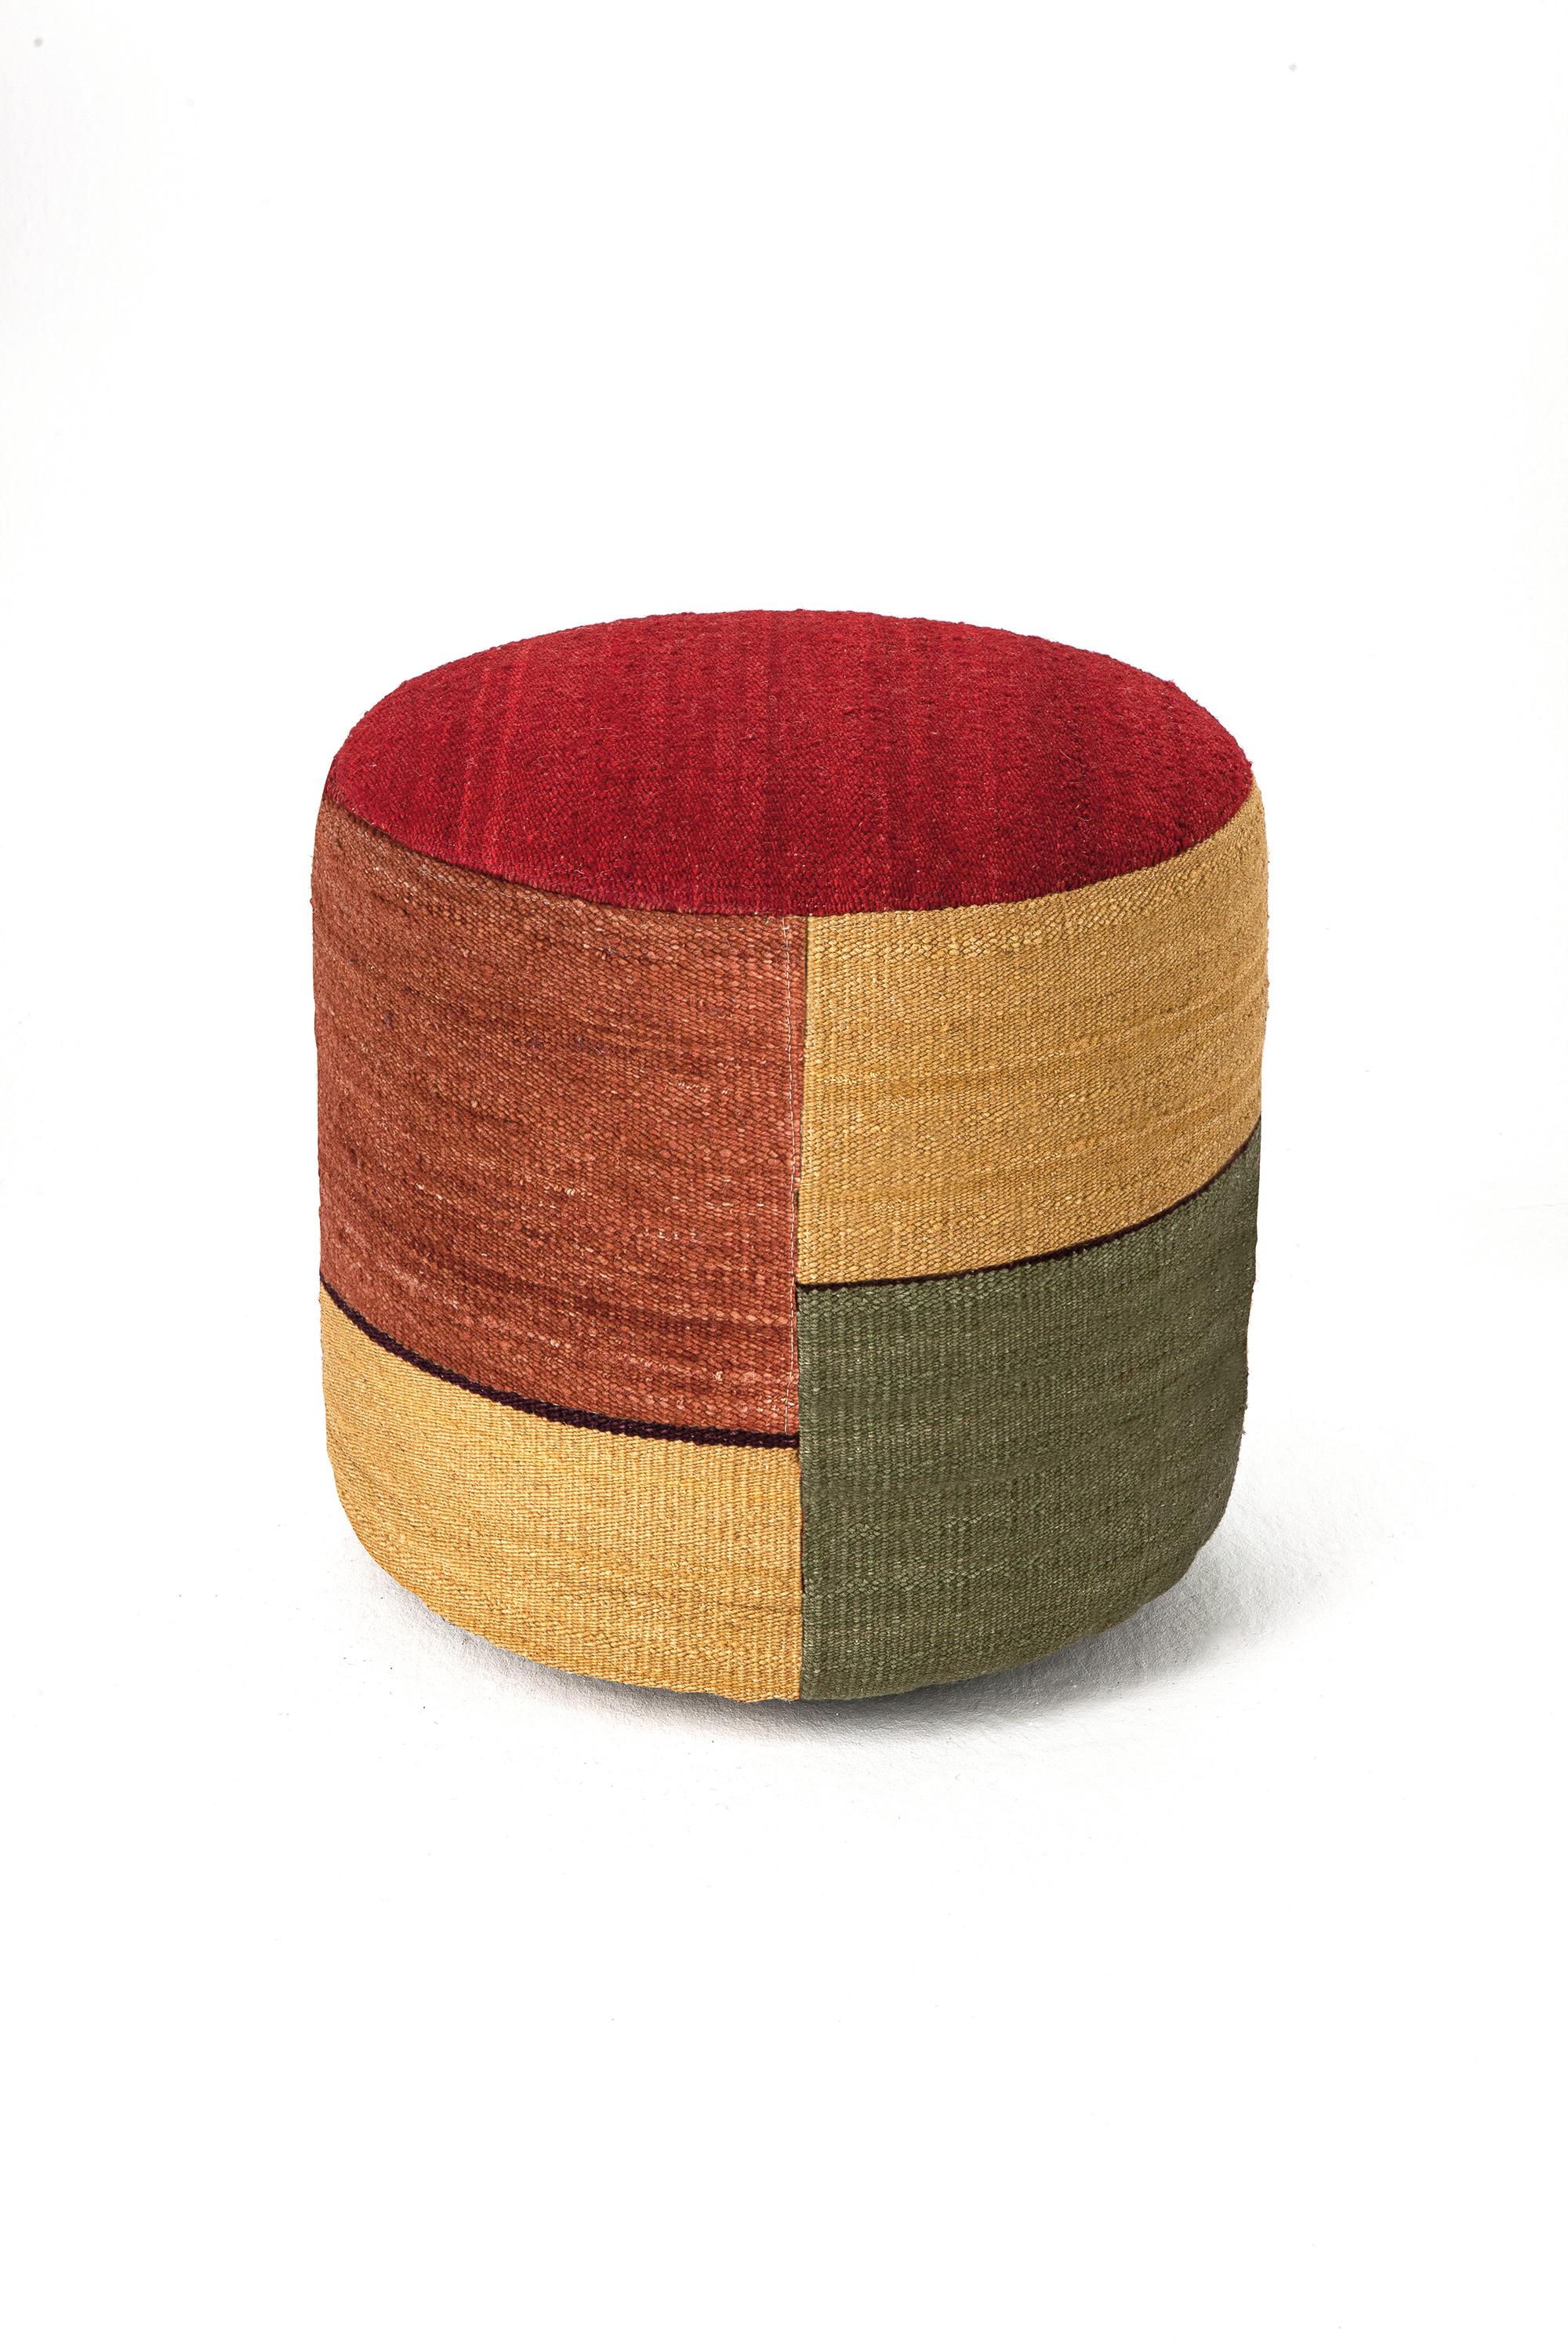 'Kilim 2' Pouf by Nani Marquina and Marcos Catalán for Nanimarquina For Sale 9